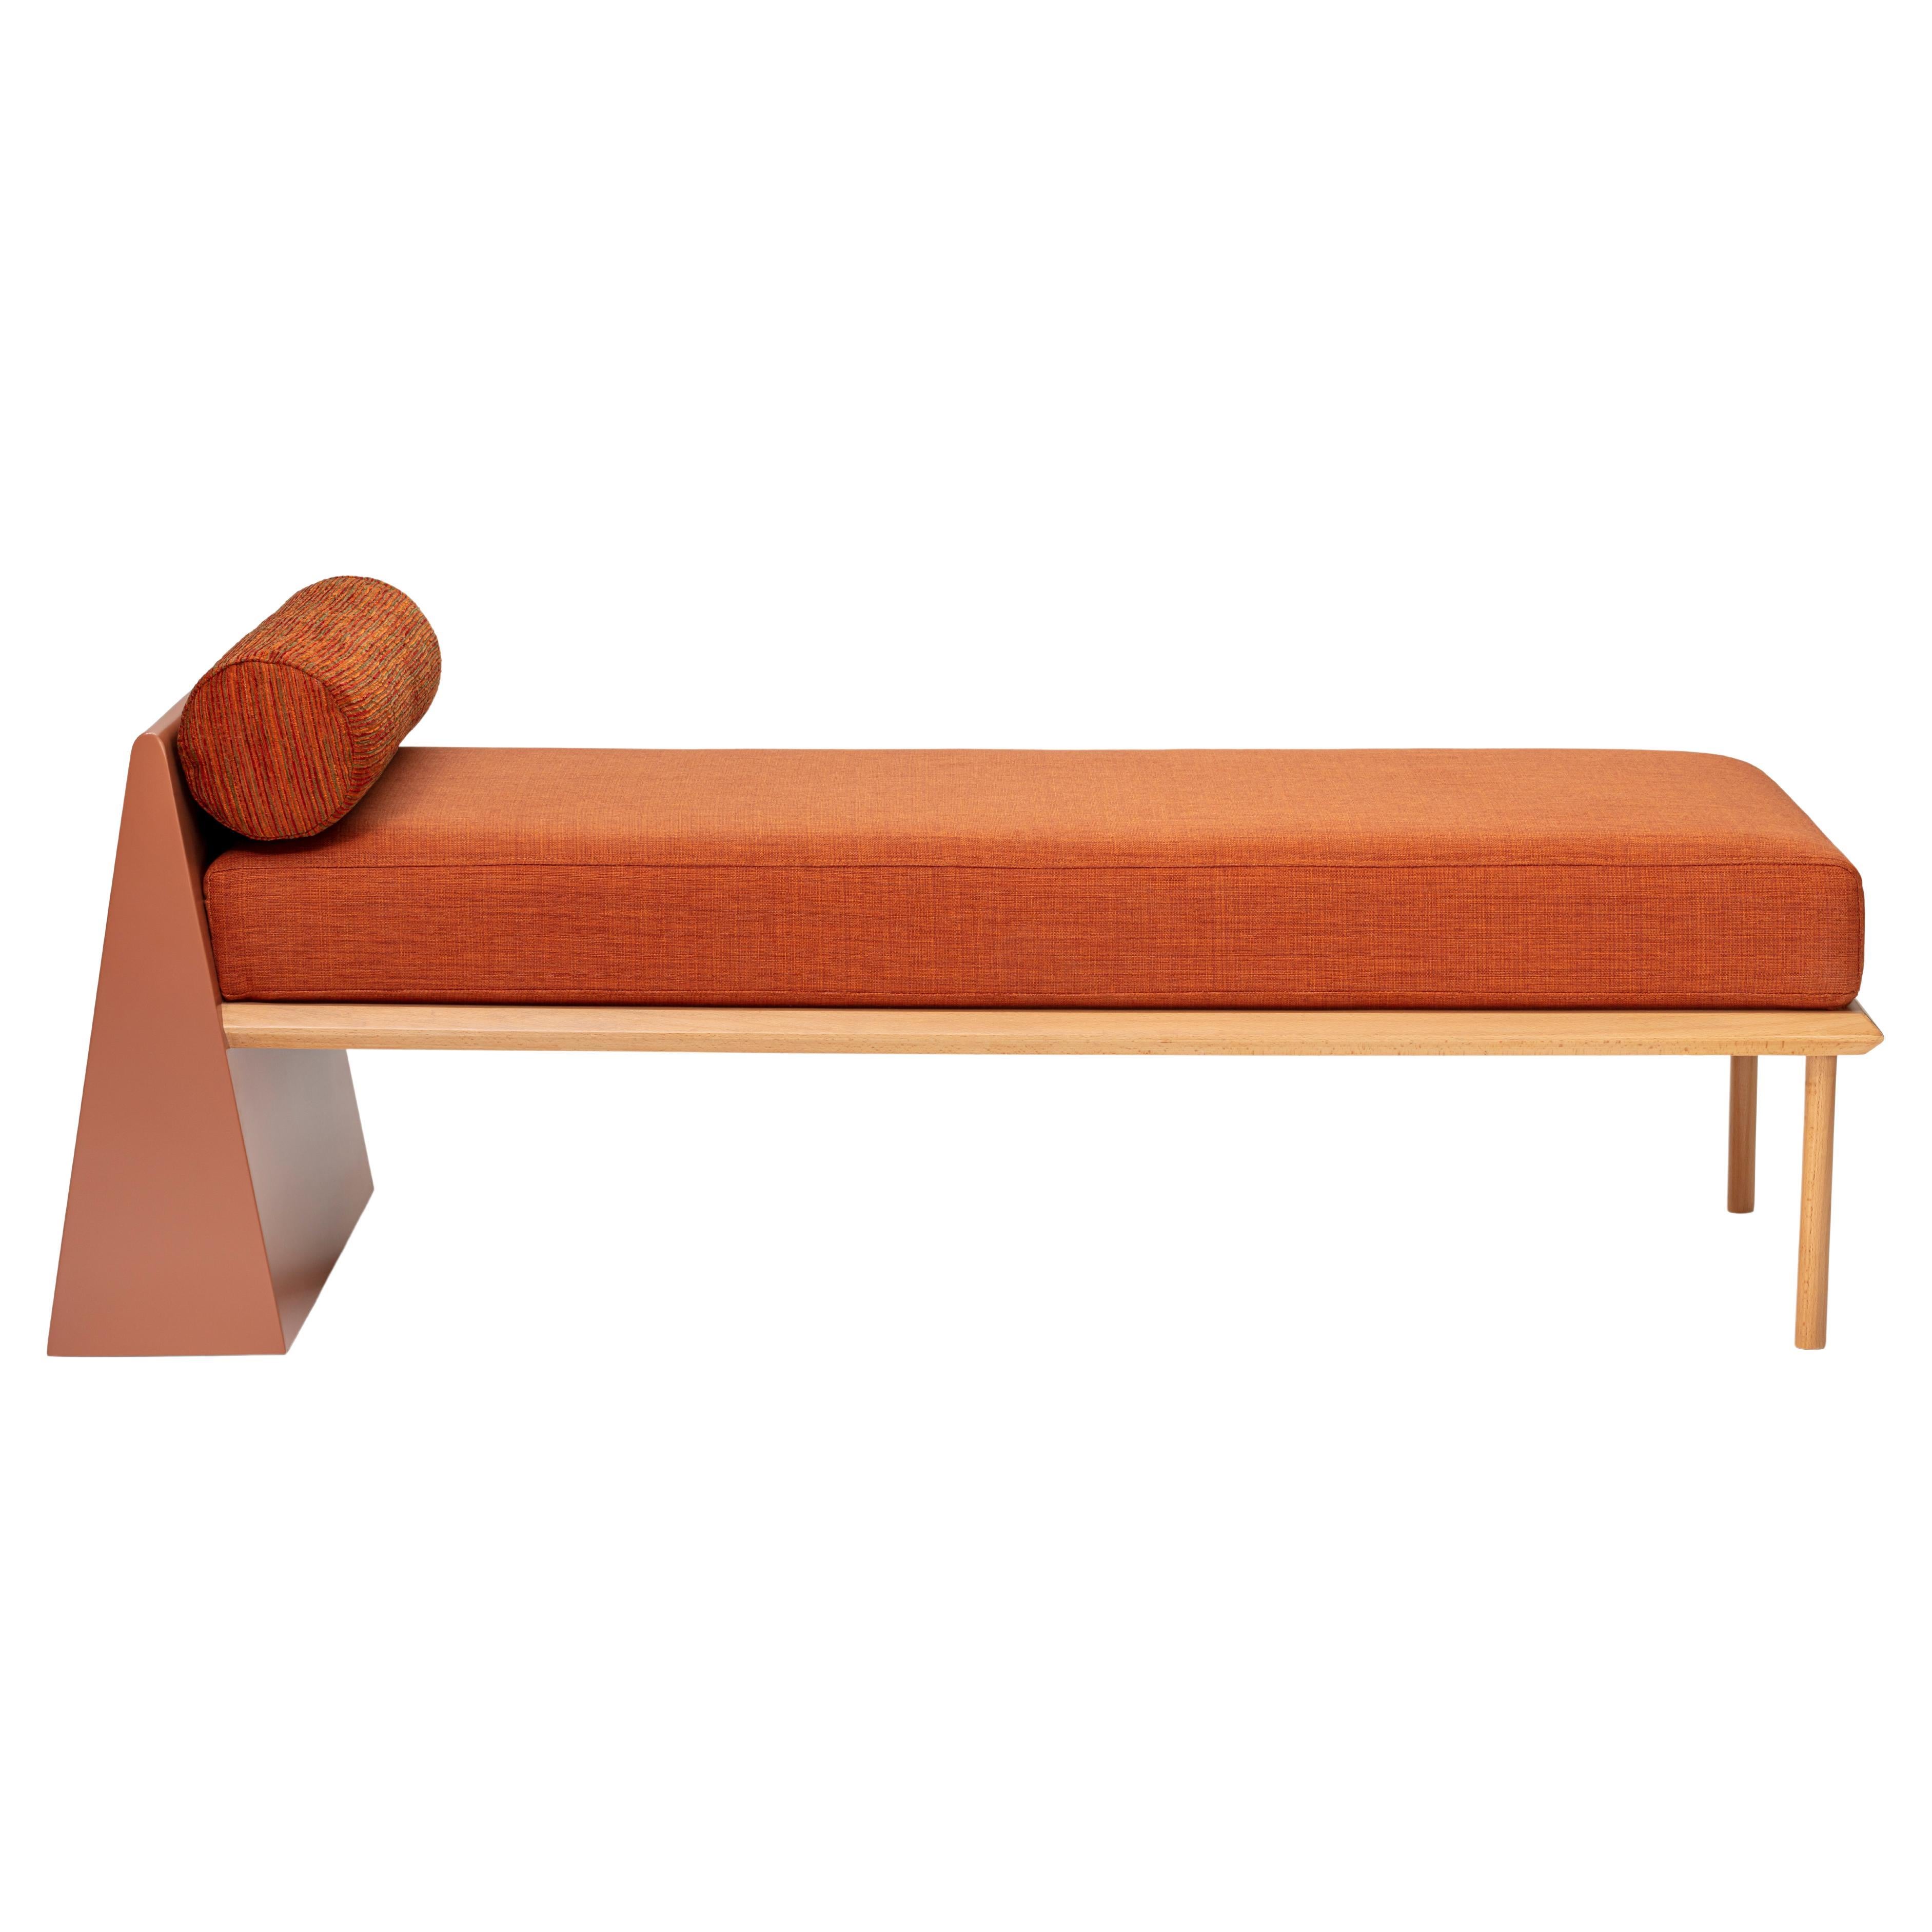 Minimalist Mid-Century Modern Style Solid Wood Bench Upholstered in Textile For Sale